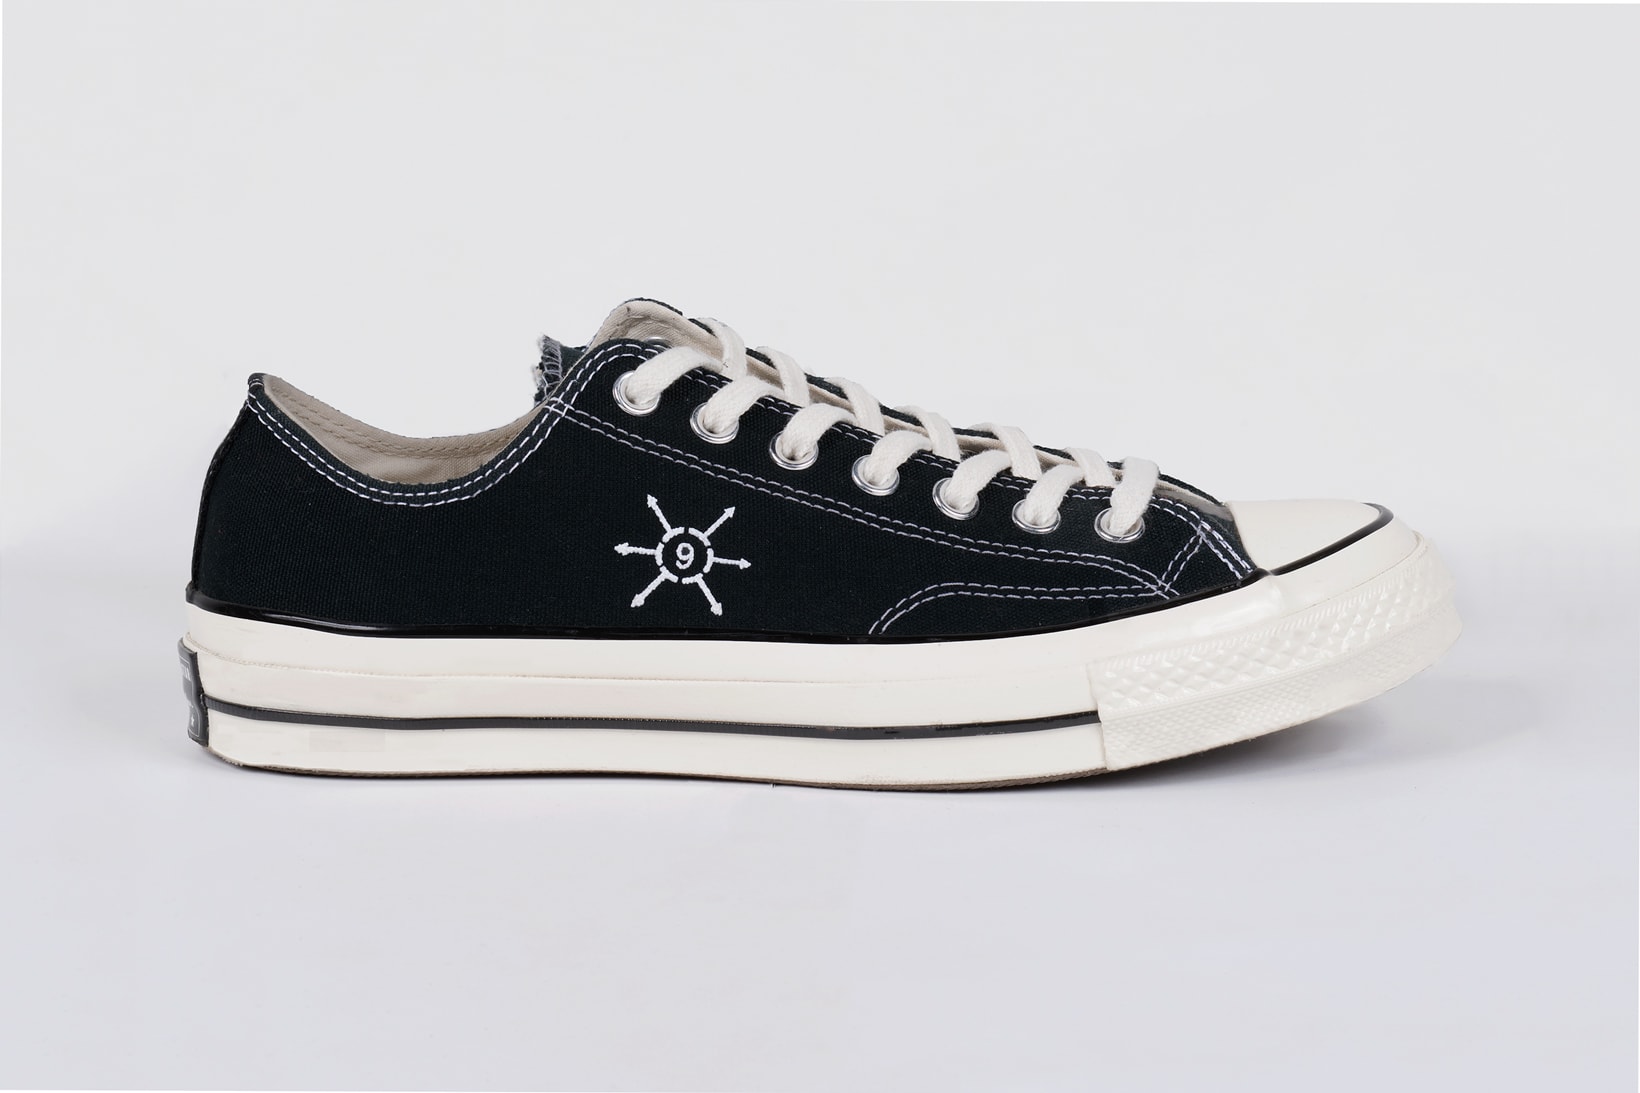 GALLERY 909 Converse Chuck Taylor All Star 70 Footwear Collaboration Shoes Sneakers